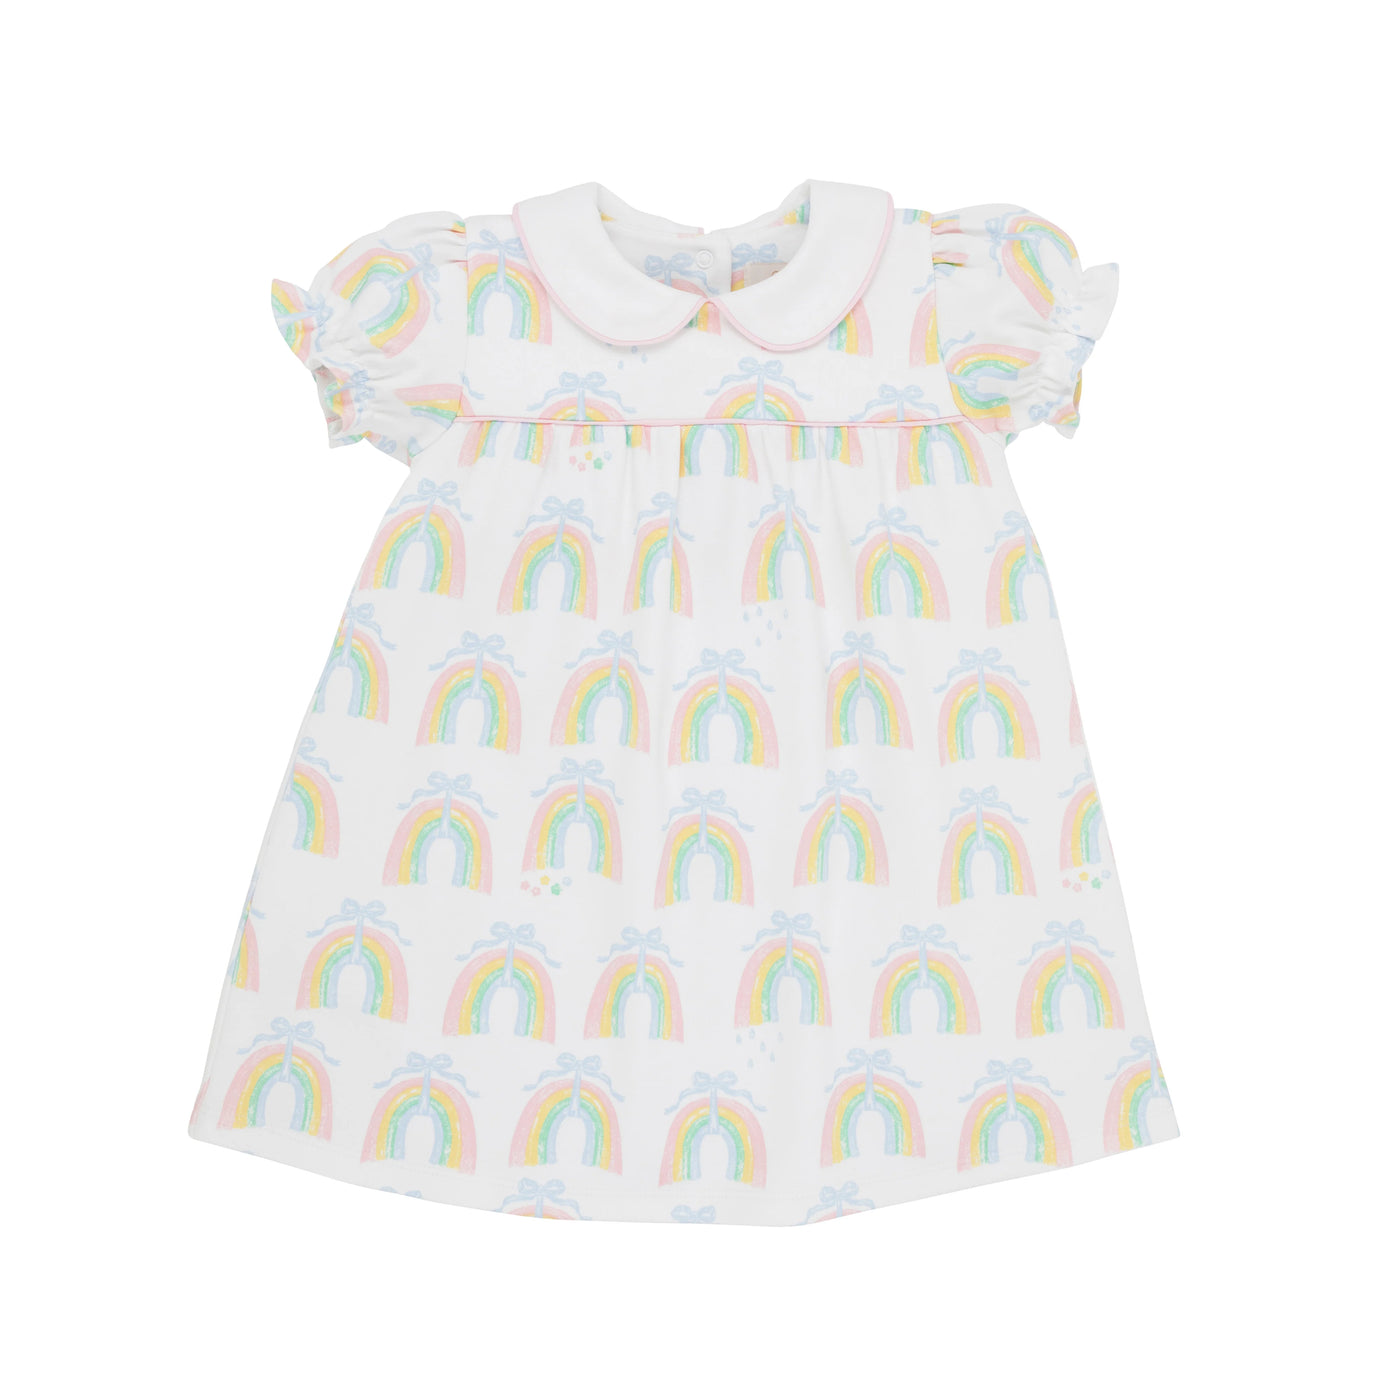 Holly Day Dress - Raine Bows With Palm Beach Pink